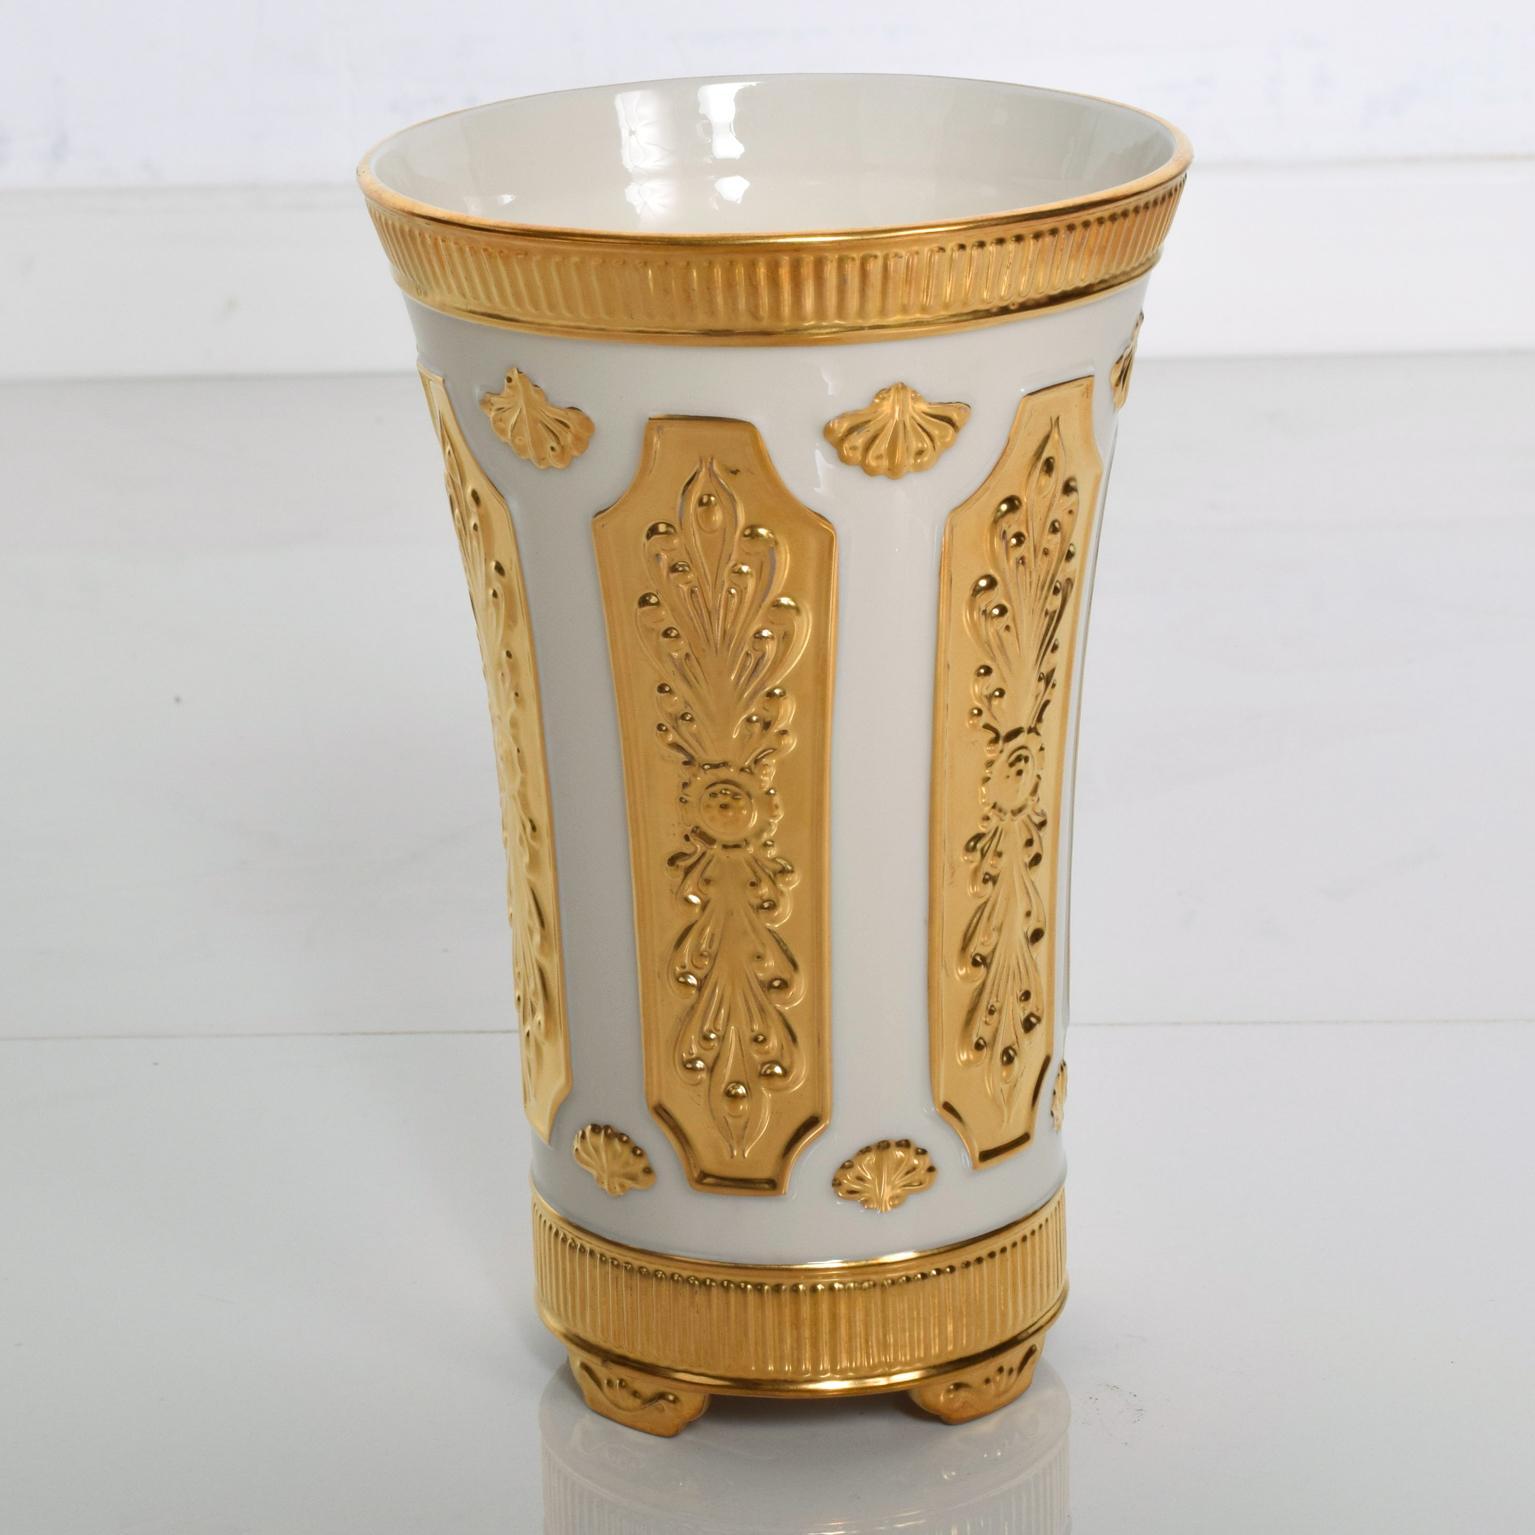 For Your Consideration A Rare Vintage LENOX Fine China 24k Gold Trimmed Vase from the 1960s Very Good Original Vintage Condition Elegant, Striking, Mid Century Modern  Made in Porcelain with Gold Trim. Dimensions are: 8 7/8